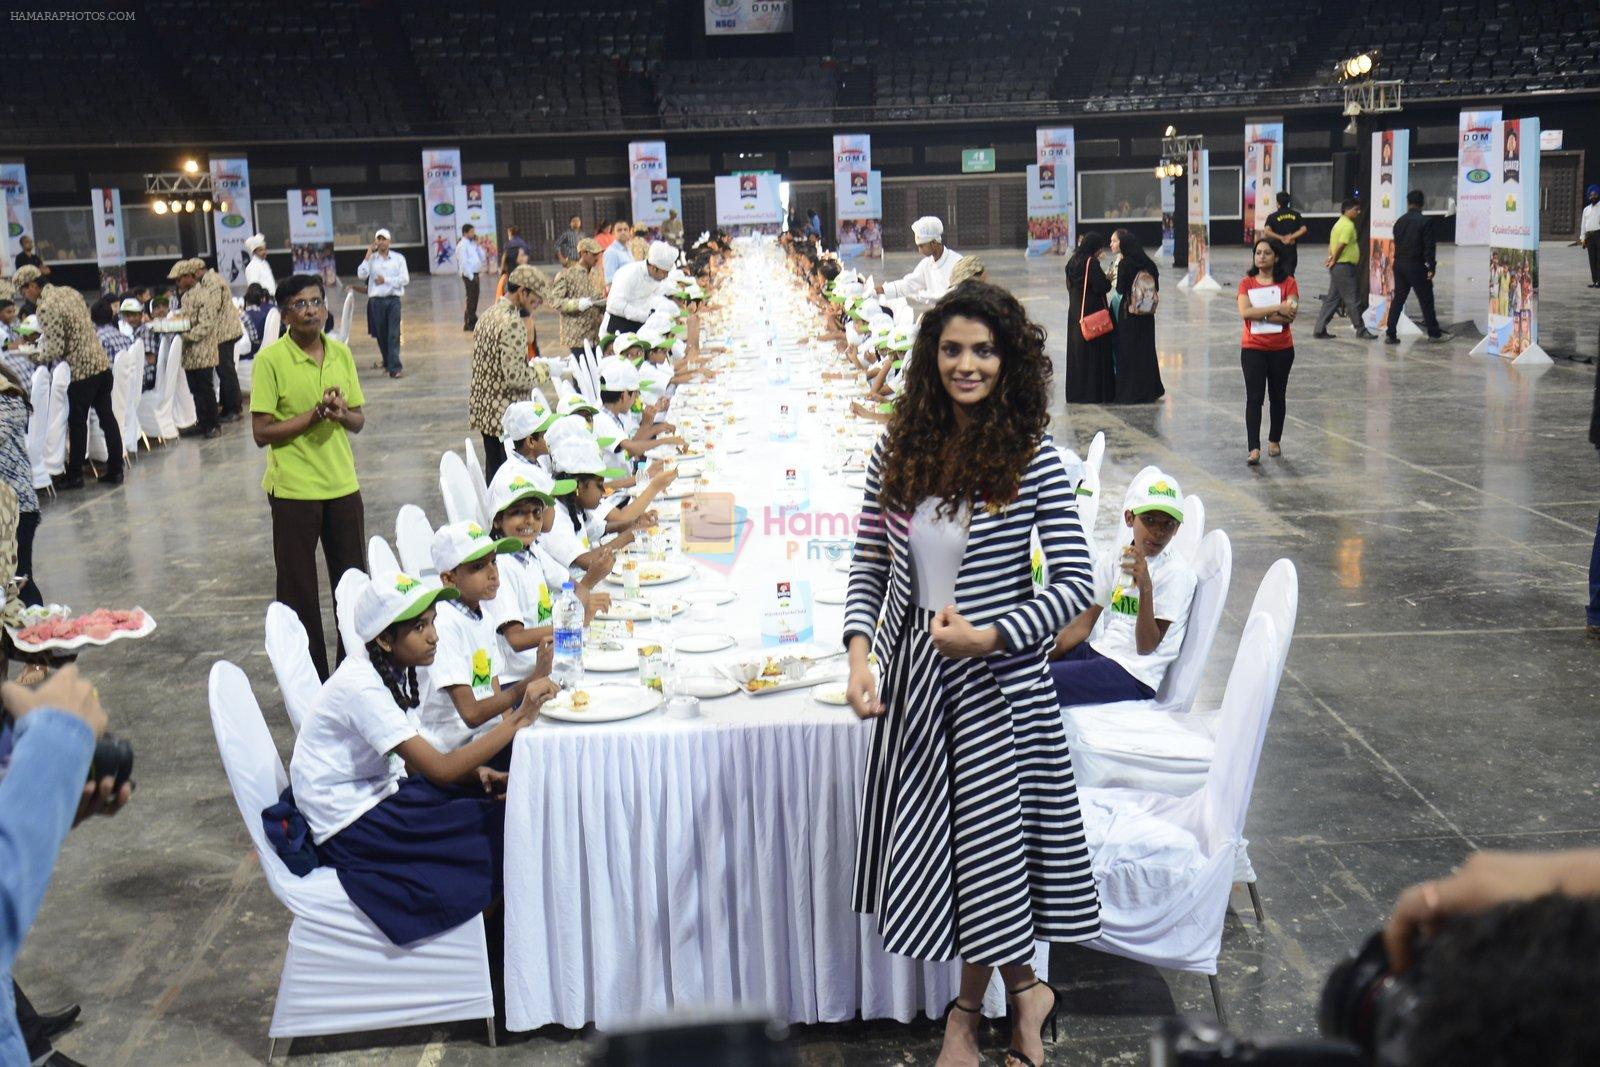 Saiyami Kher for world food day event by smile foundation at Quaker on 16th Oct 2016